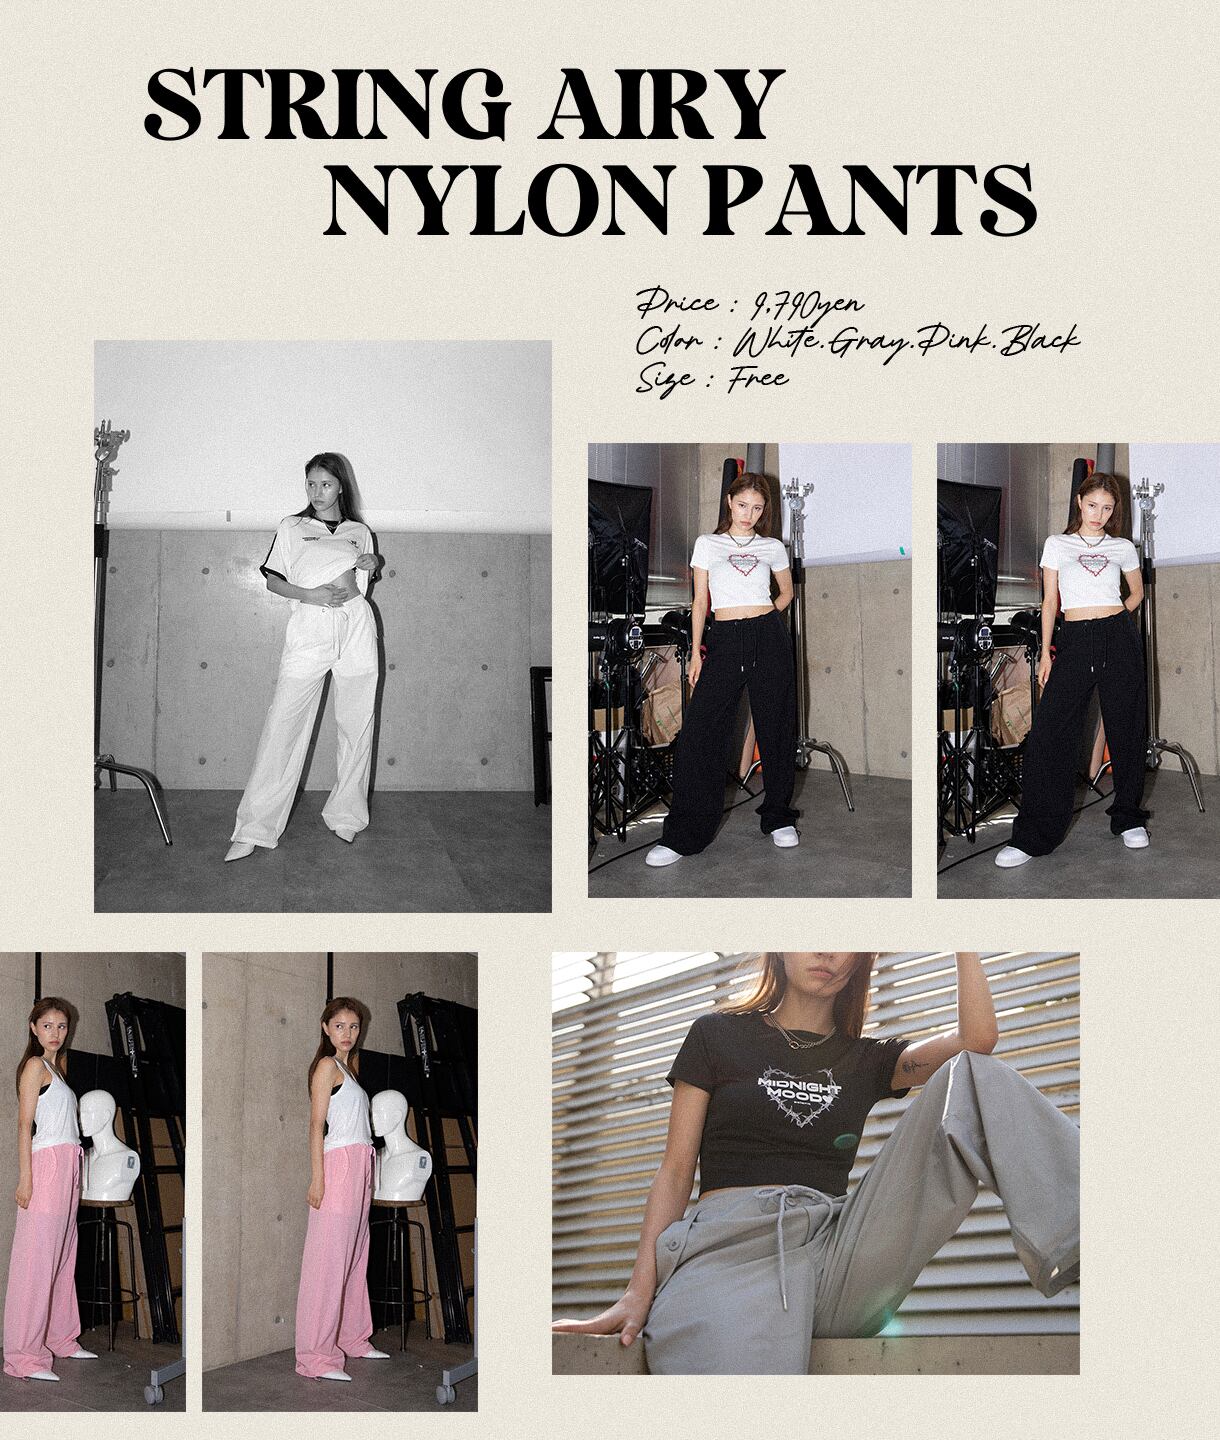 String airy nylon pants STAFF SNAP公開！ | ACLENT（アクレント）